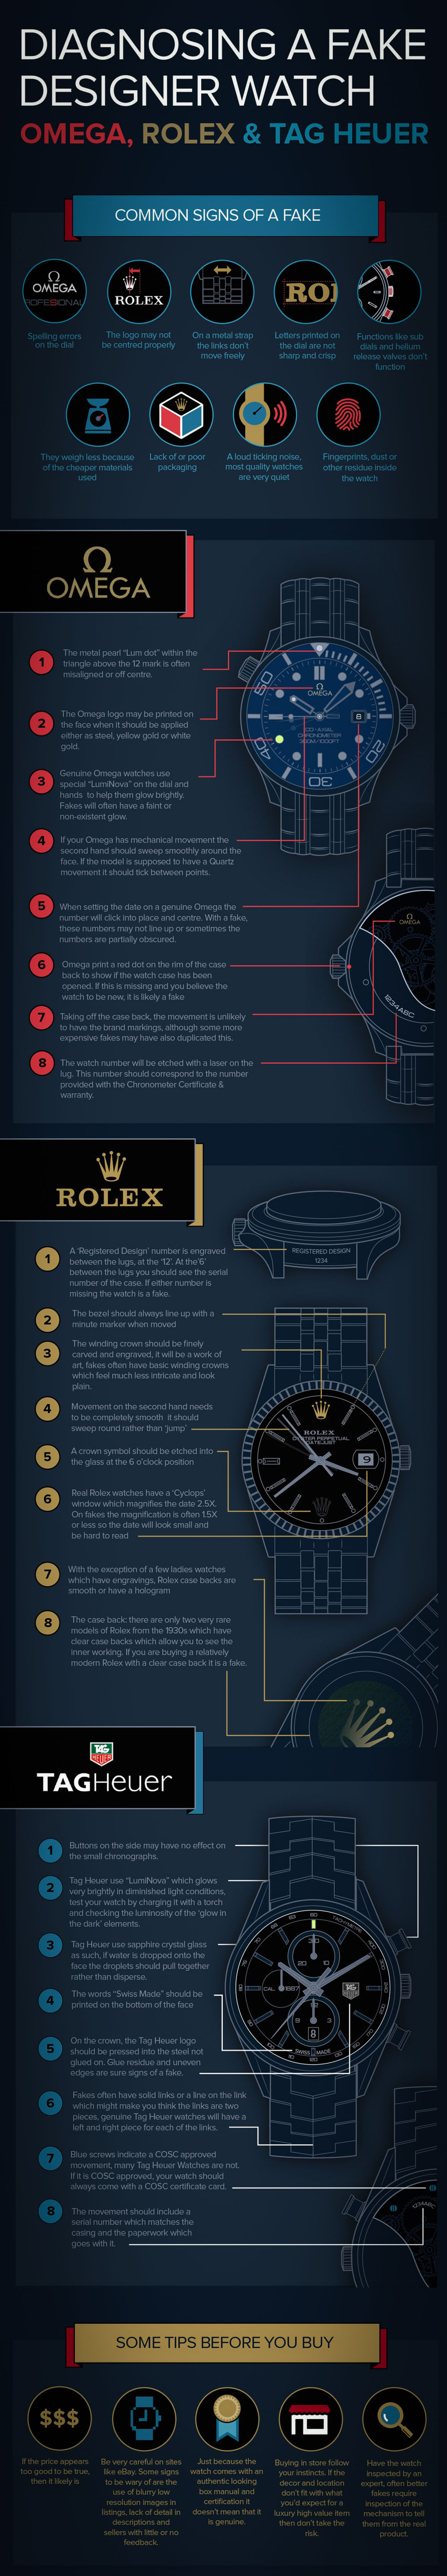 Infographie-Fausse-Rolex-Omega-Tag-Heuer-2